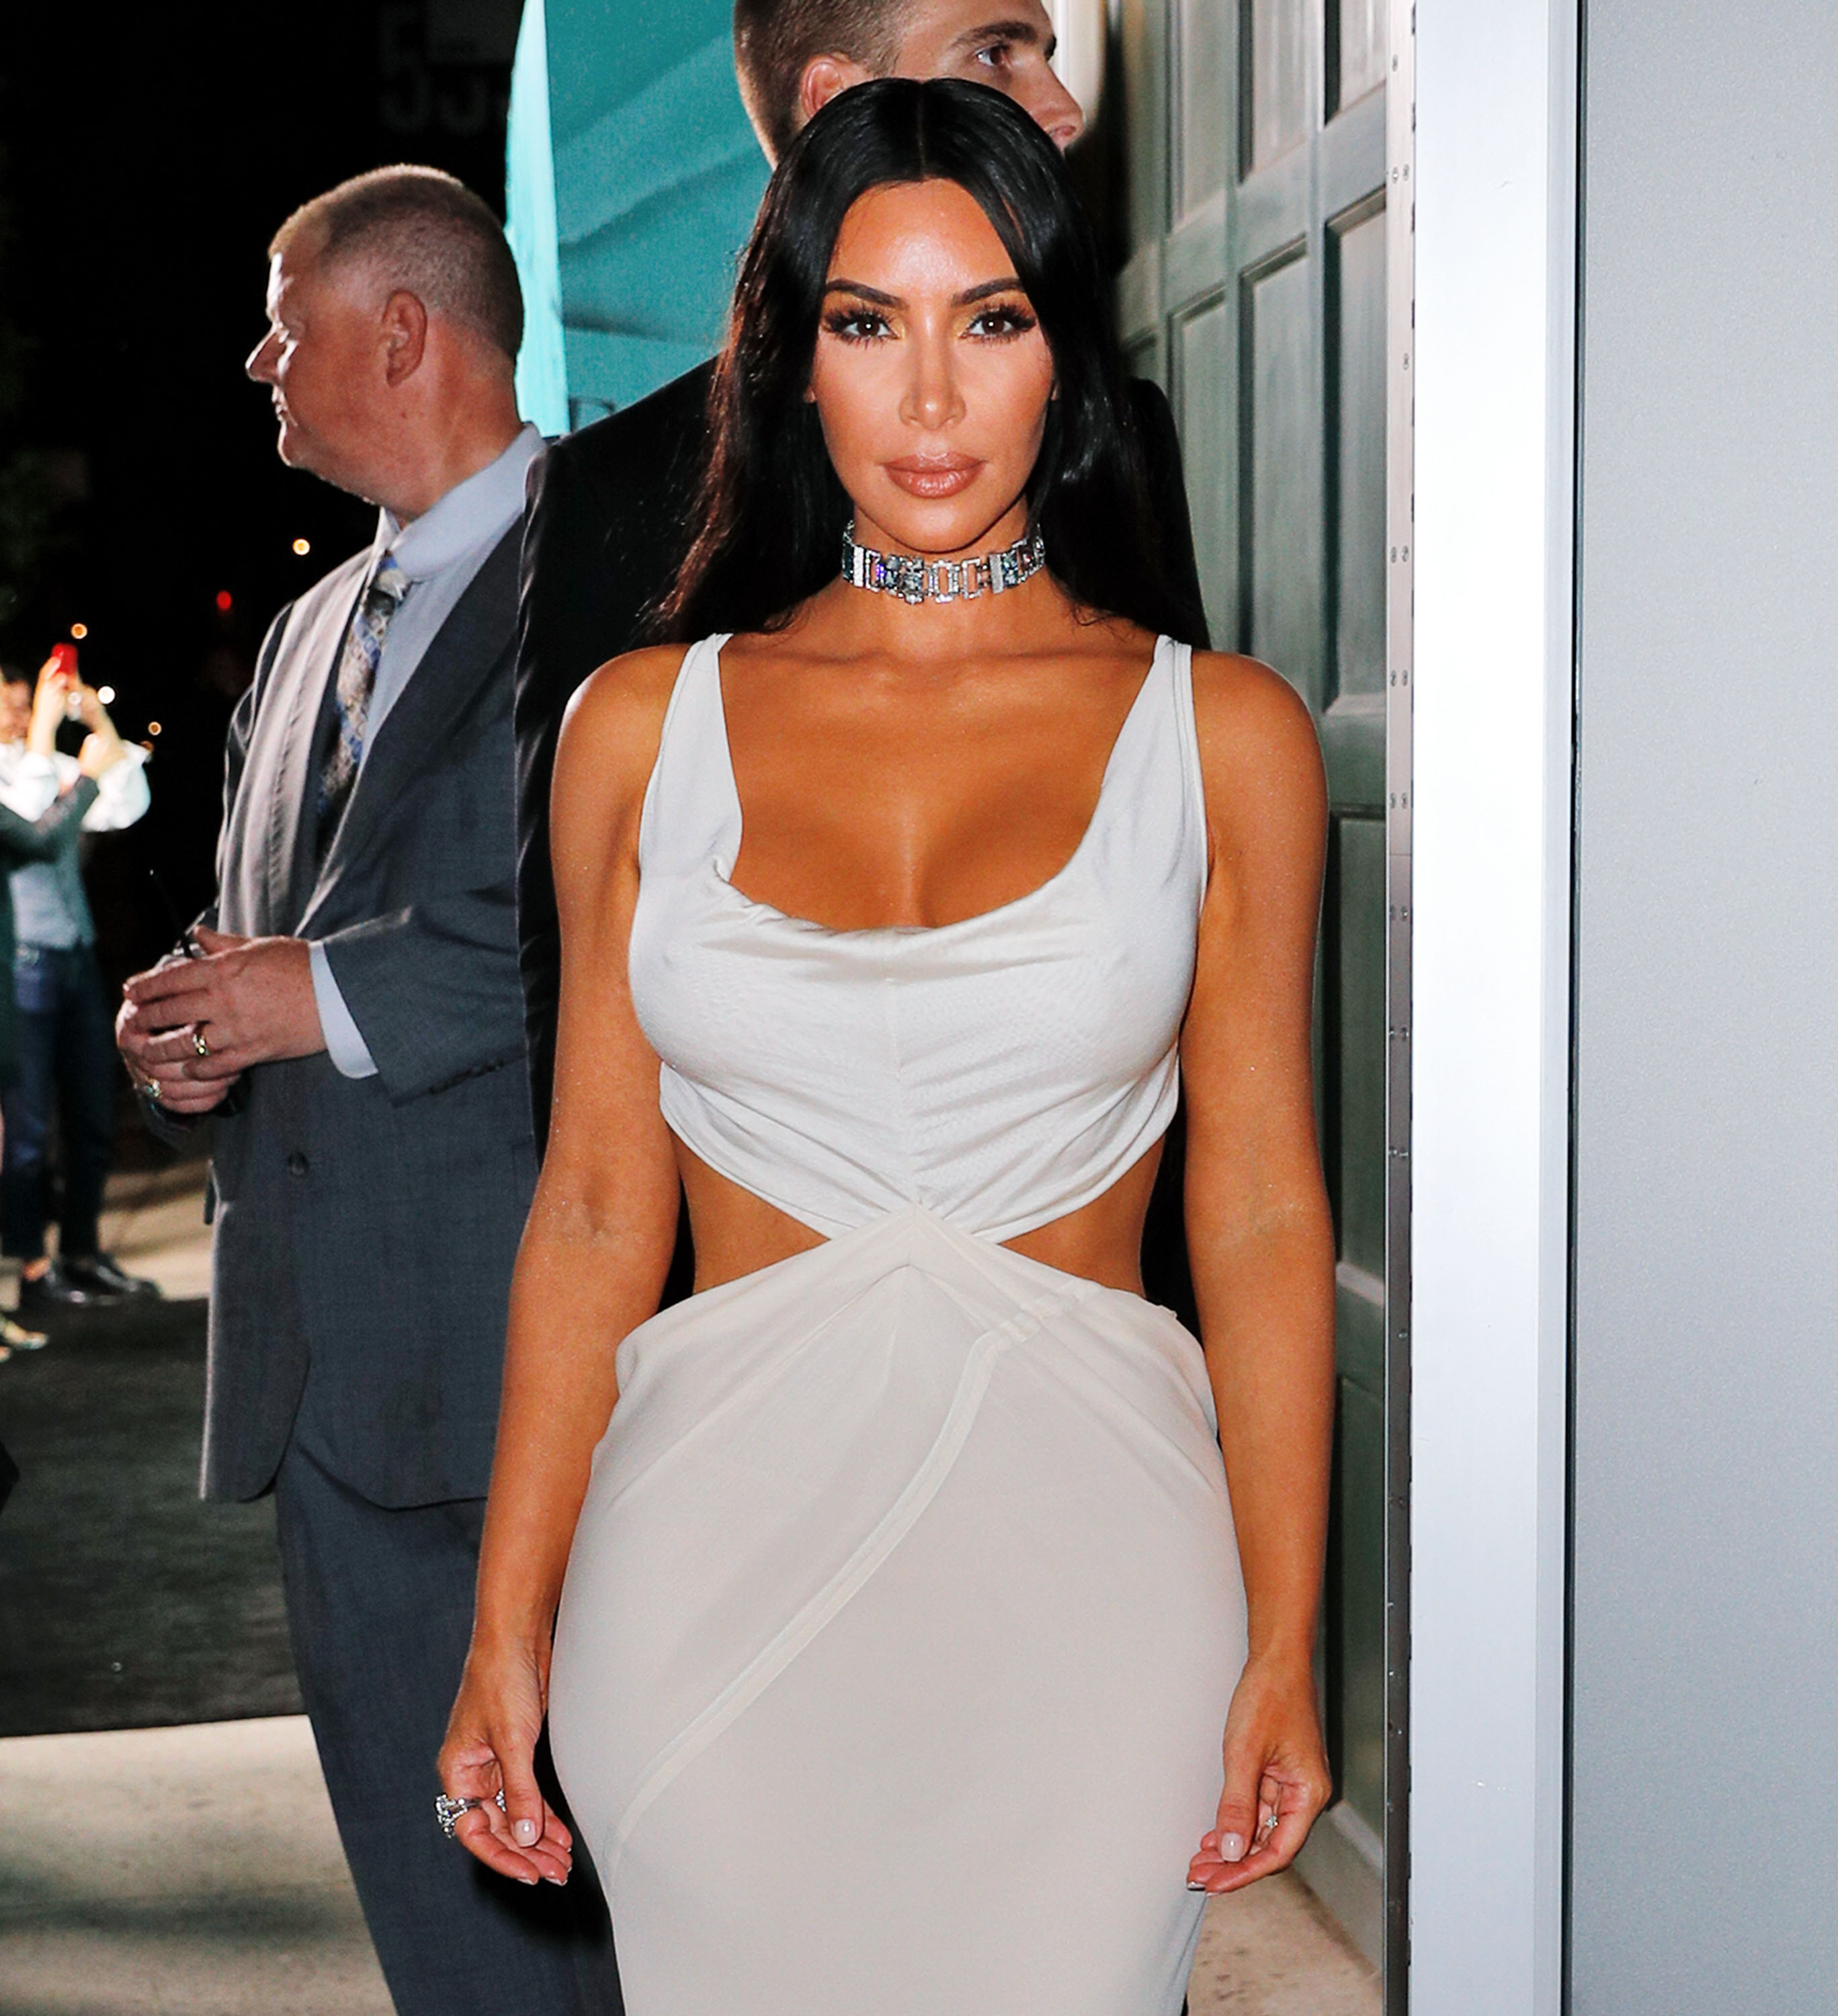 Kim Kardashian pictured on October 9, 2018 in New York City. | Source: Getty Images